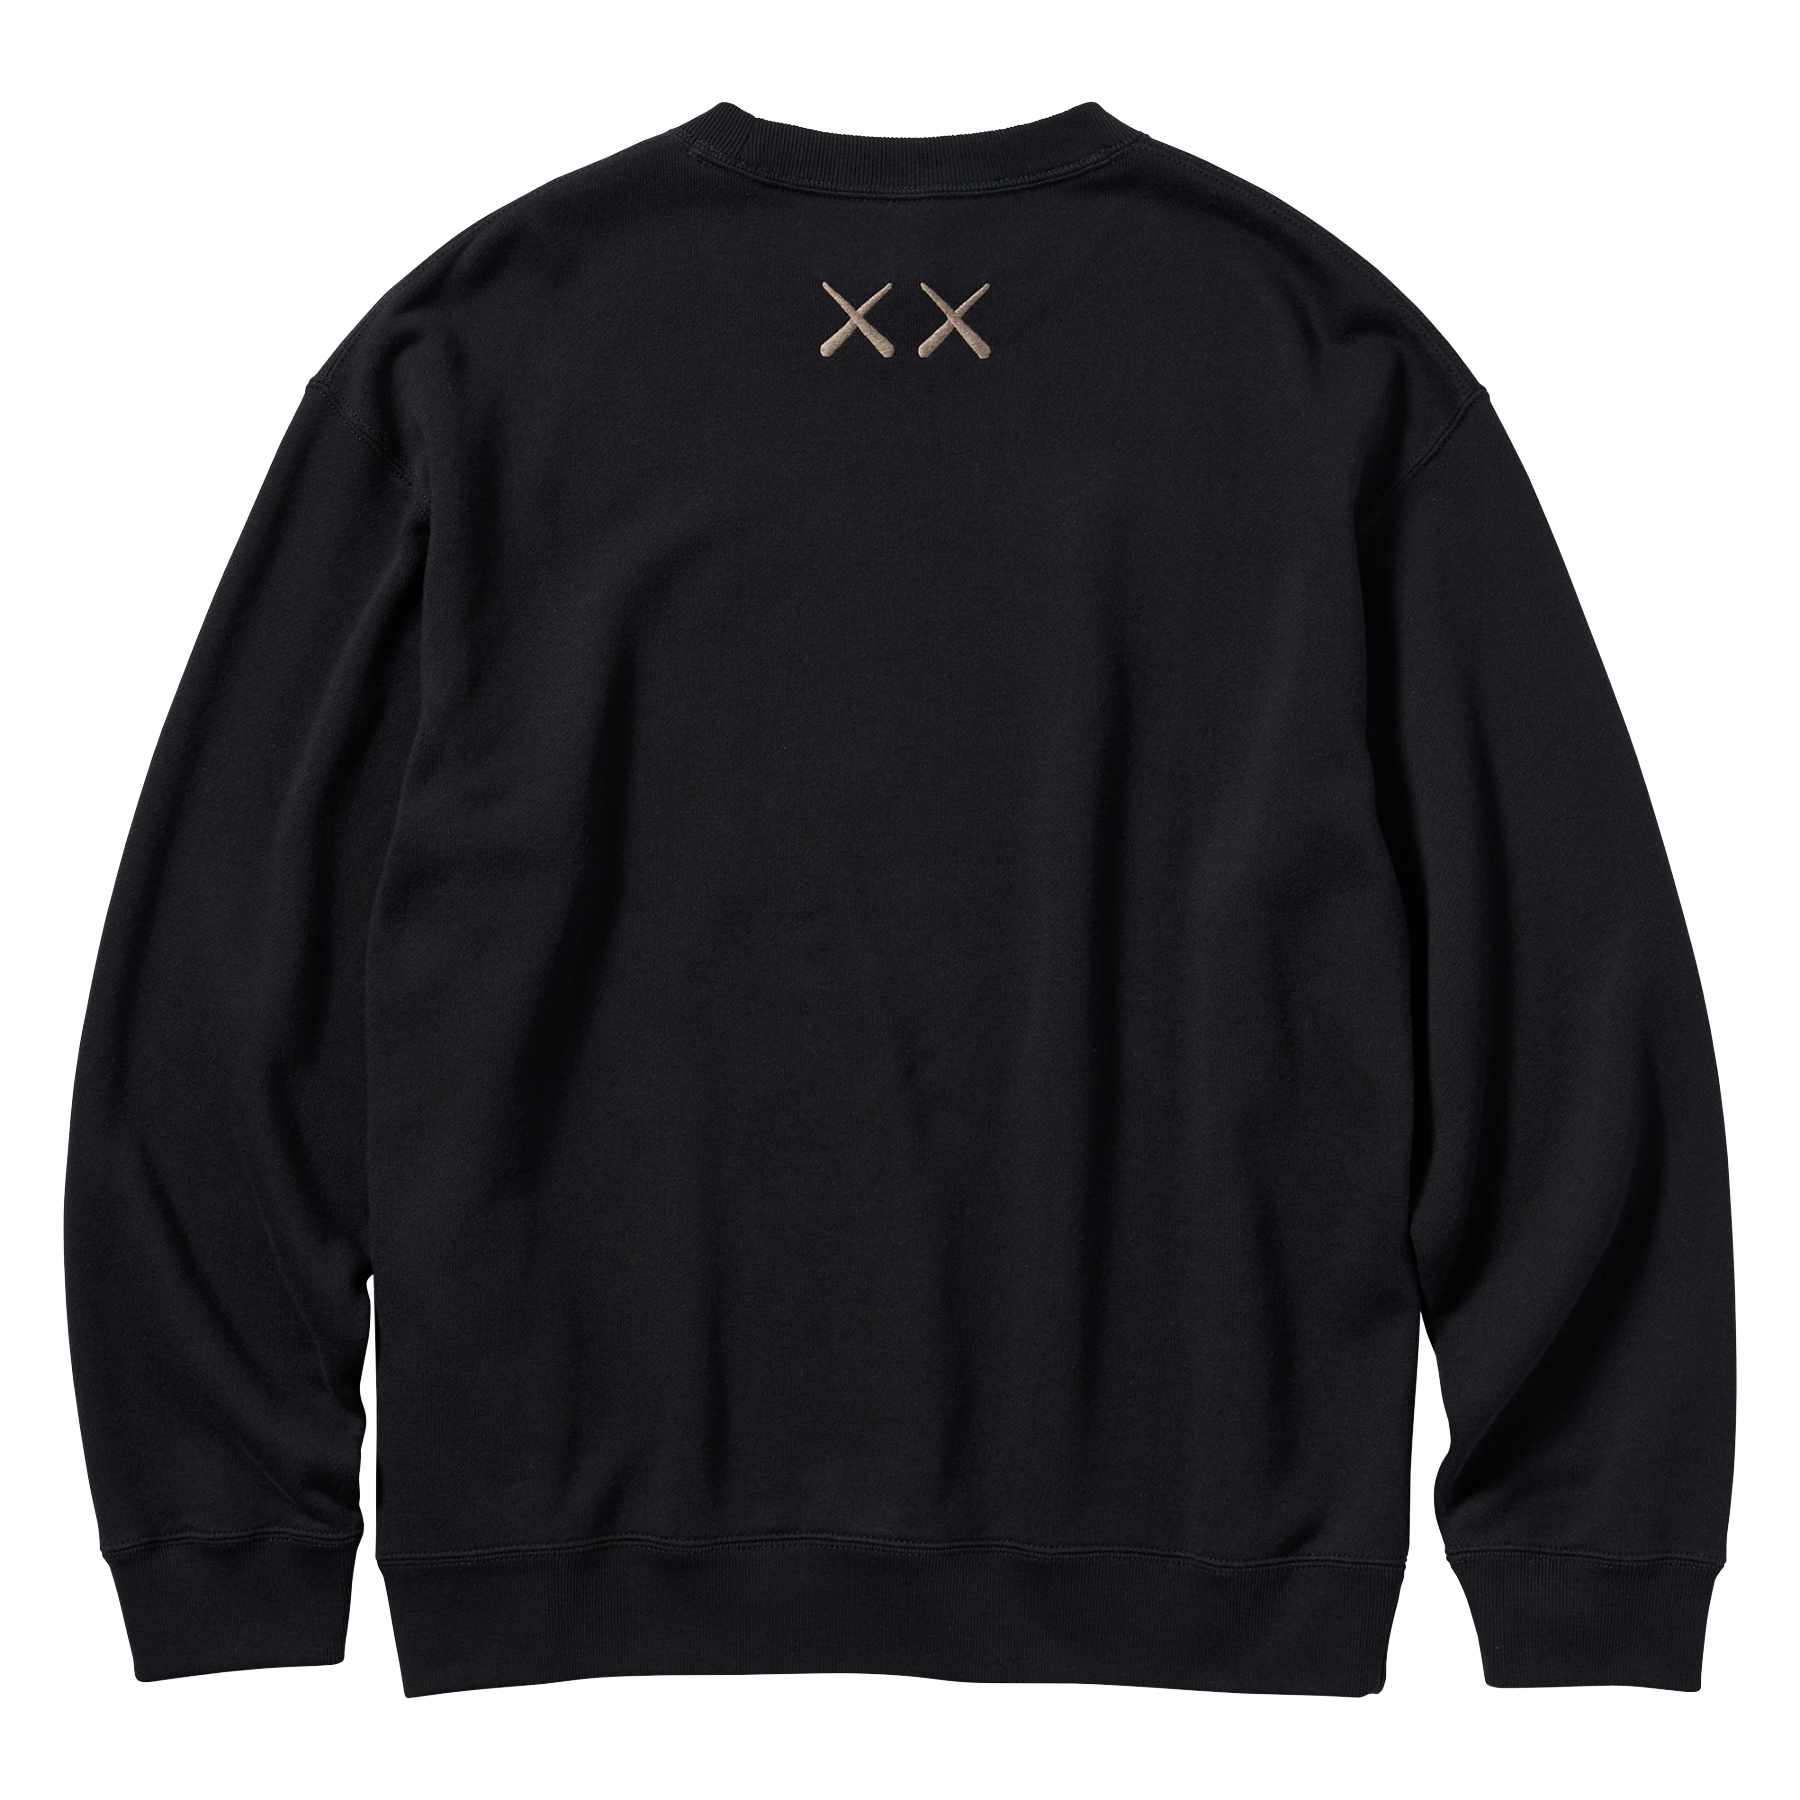 A black KAWS x UNIQLO sweater printed with a 'What Party" artwork